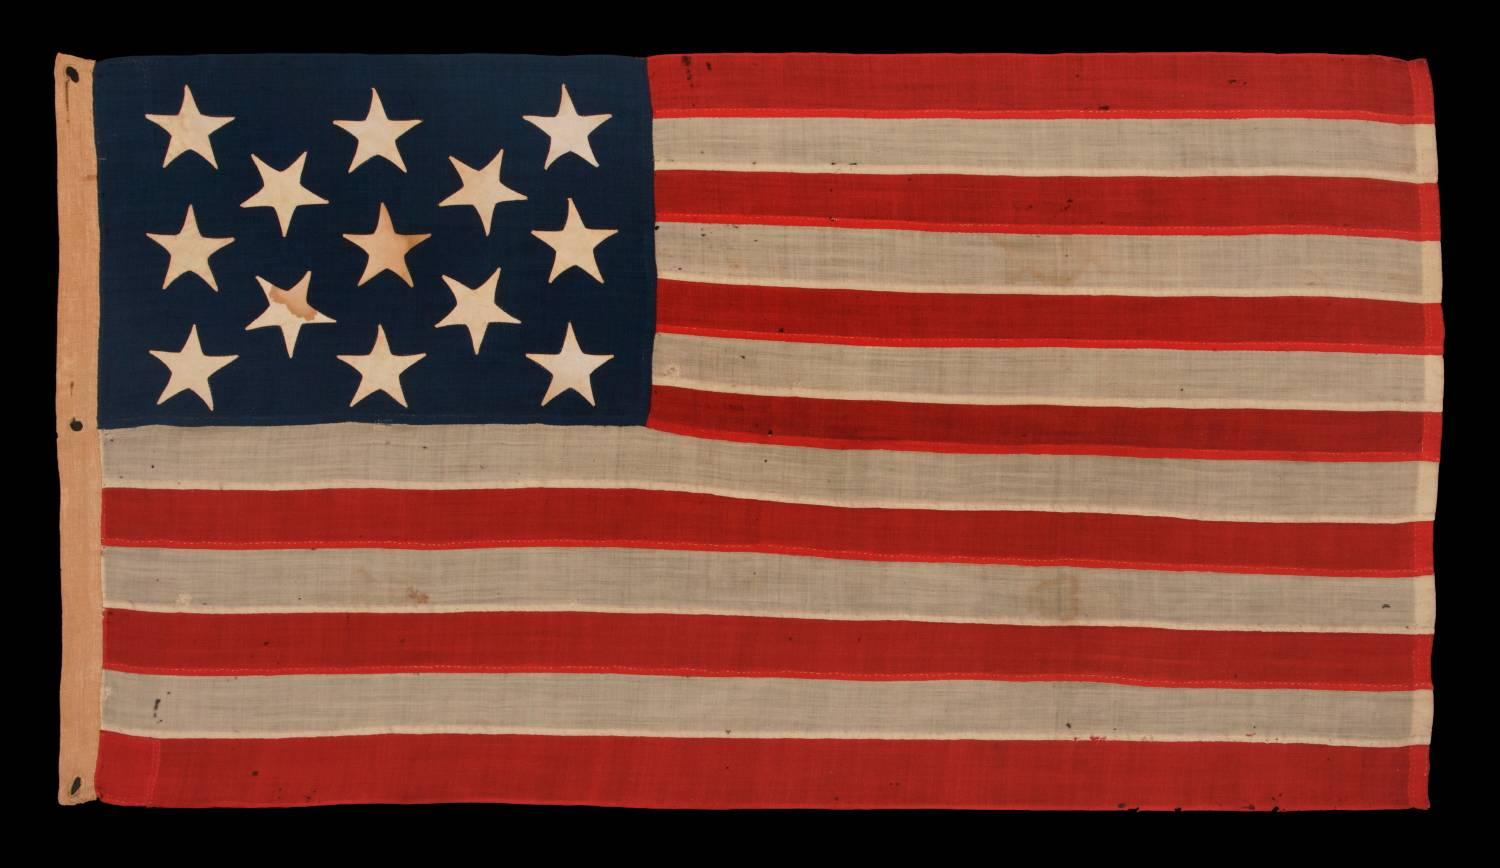 13 stars on a U.S. Navy small boat ensign, entirely hand-sewn, probably made between 1882 and 1884, a beautiful example in a remarkable state of preservation:

Despite the fact that America hasn't been comprised of 13 states since 1791, 13 star